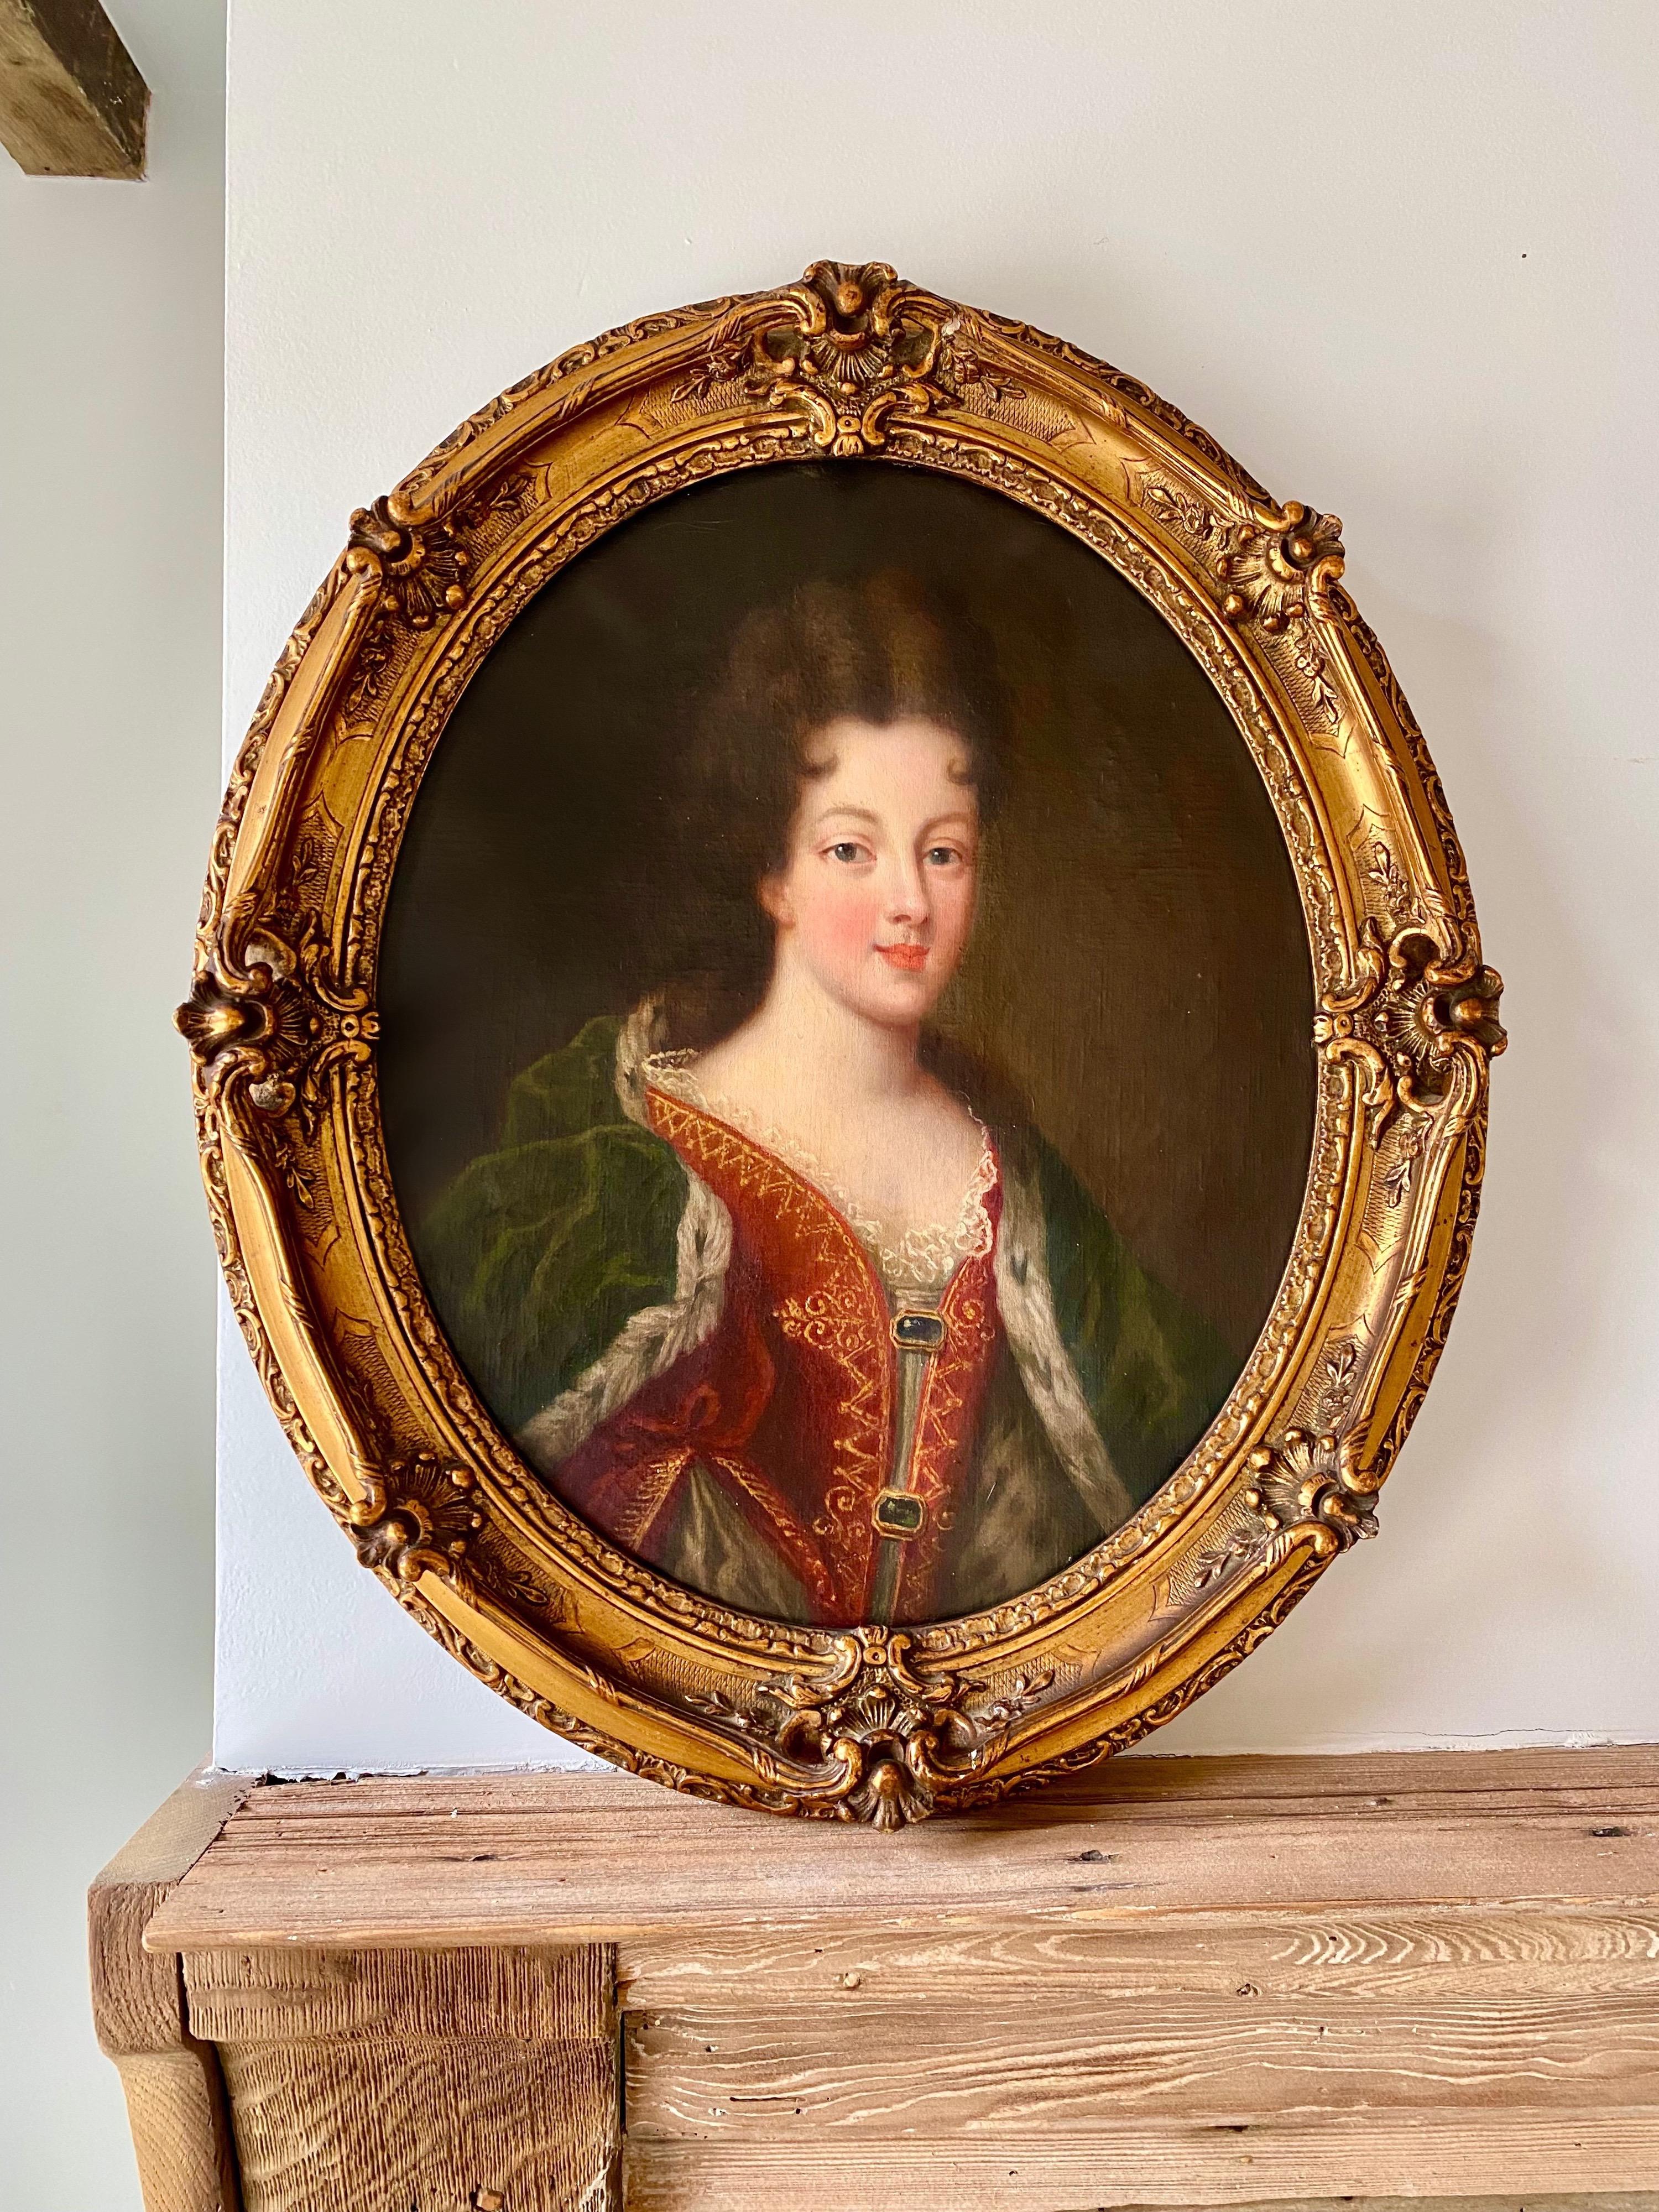 Antique French Portrait painting of a noble lady - young princess Mignard - Painting by Pierre Mignard